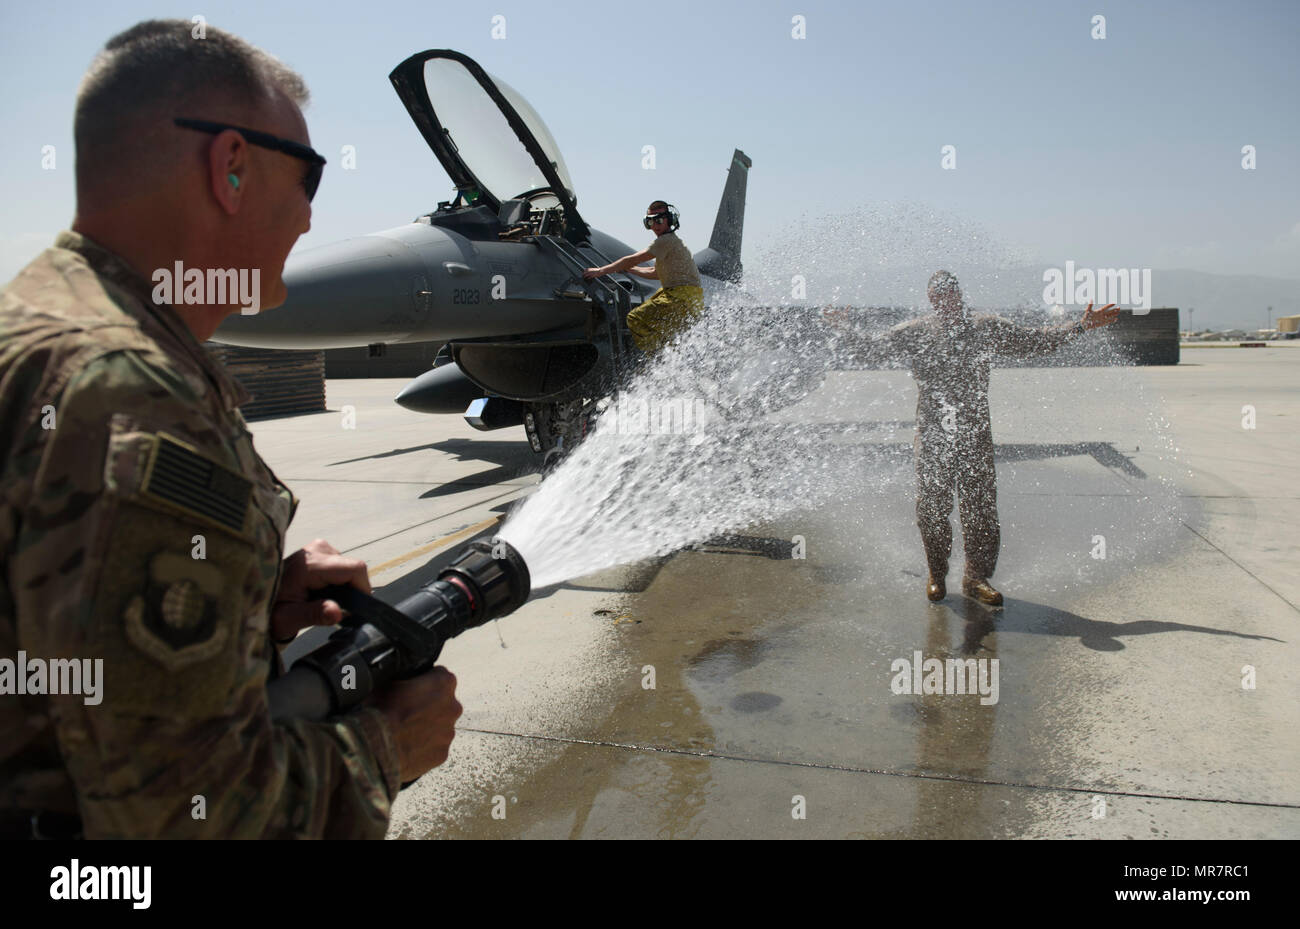 Chief Master Sgt. Peter Speen, command chief of the 455th Air Expeditionary Wing, hoses down Brig. Gen. Jim Sears at Bagram Airfield, Afghanistan, May 22, 2017. Sears, commander of the 455th AEW, conducted his fini flight out of Bagram Airfield. The fini flight is a time-honored military aviation tradition marking the last flight of a commander's tour. (U.S. Air Force photo by Staff Sgt. Benjamin Gonsier) Stock Photo